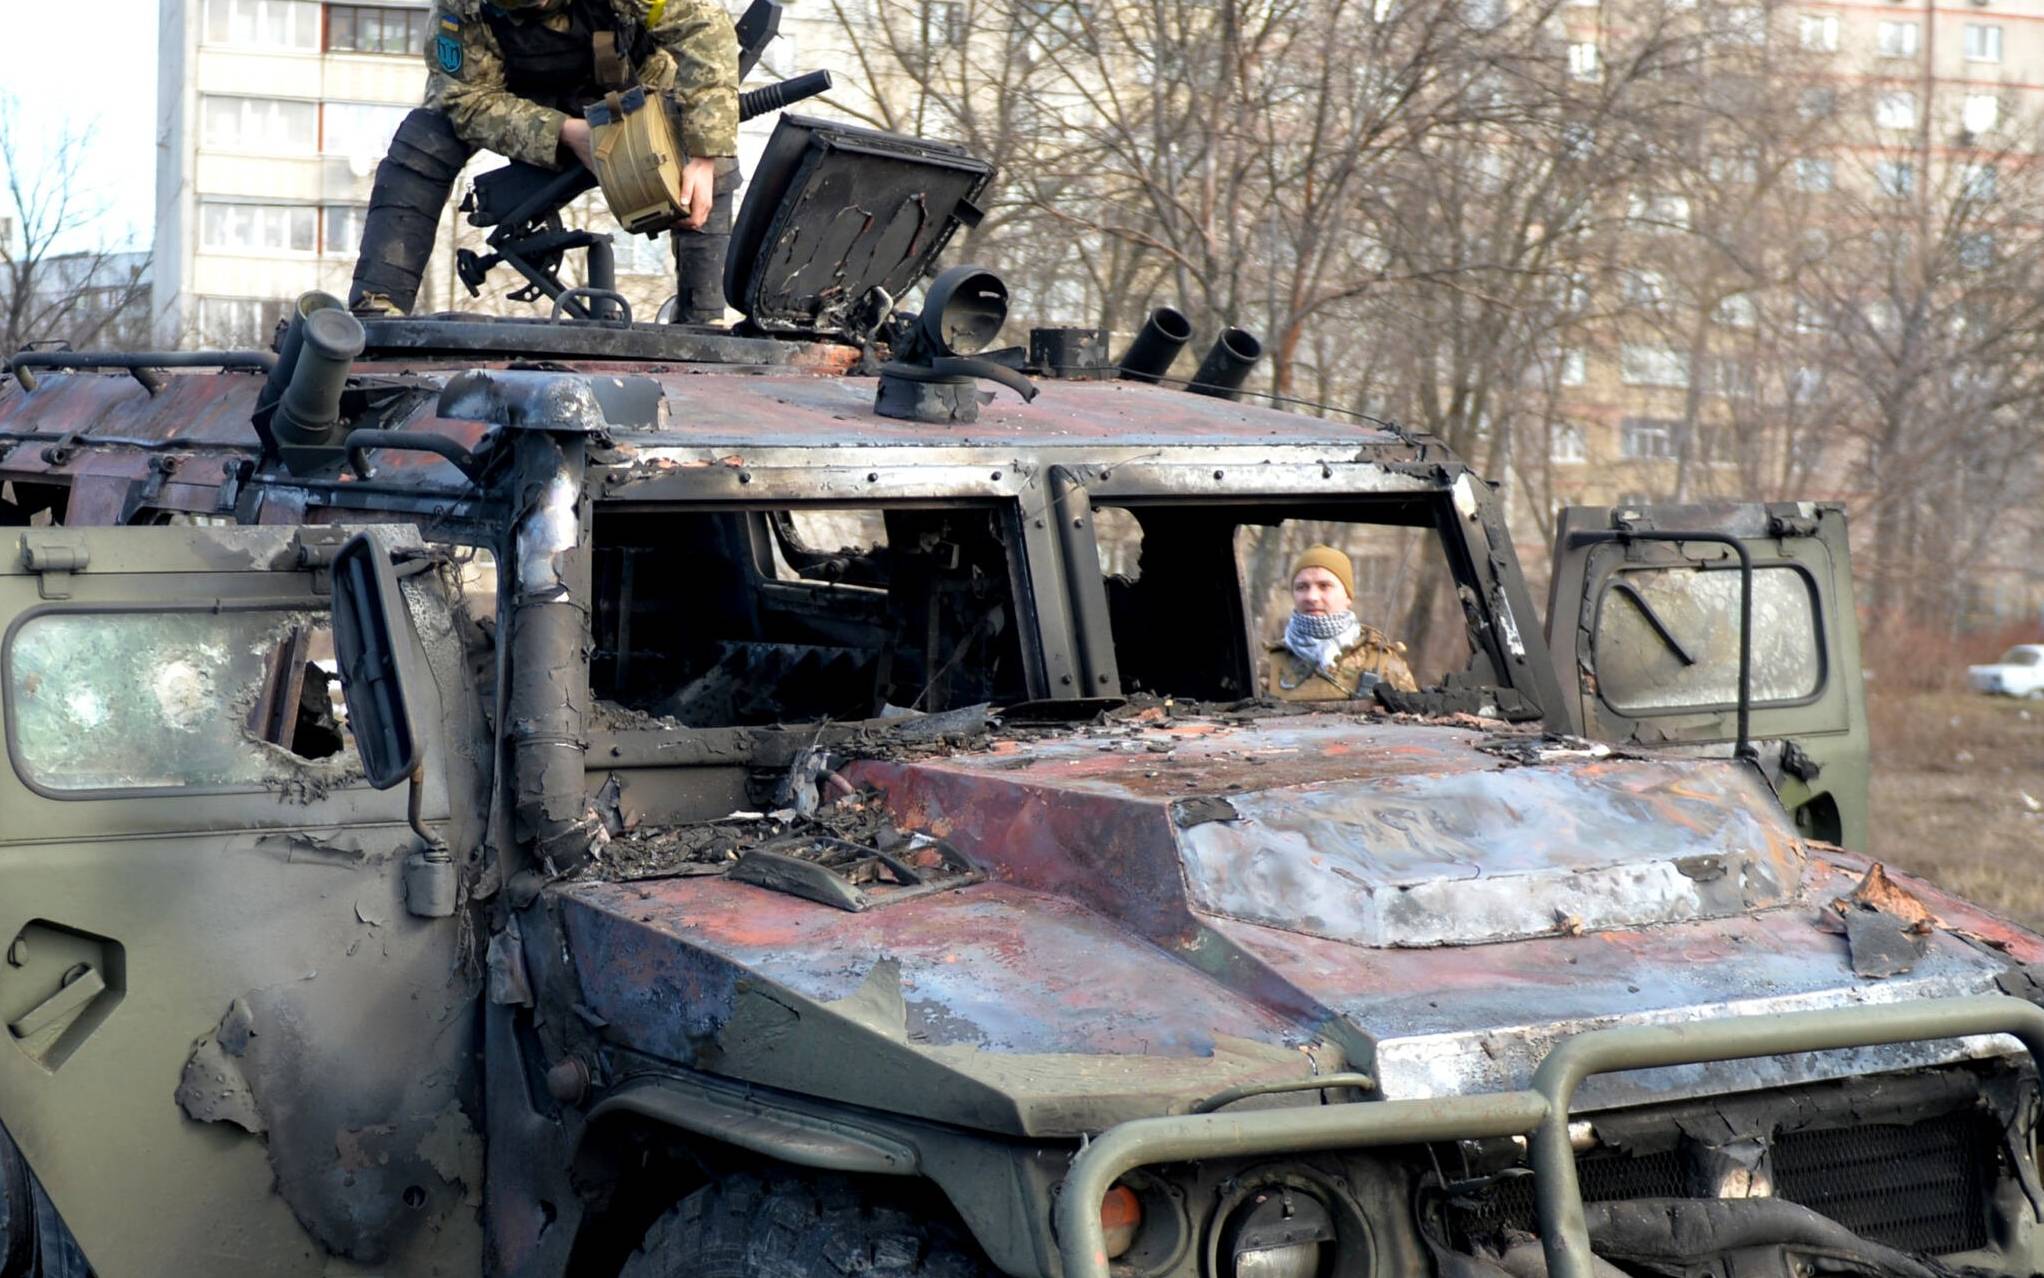 An Ukrainian Territorial Defence fighter examines a destroyed Russian infantry mobility vehicle GAZ Tigr after the fight in Kharkiv on February 27, 2022. - Ukrainian forces secured full control of Kharkiv on February 27, 2022 following street fighting with Russian troops in the country's second biggest city, the local governor said. (Photo by Sergey BOBOK / AFP)